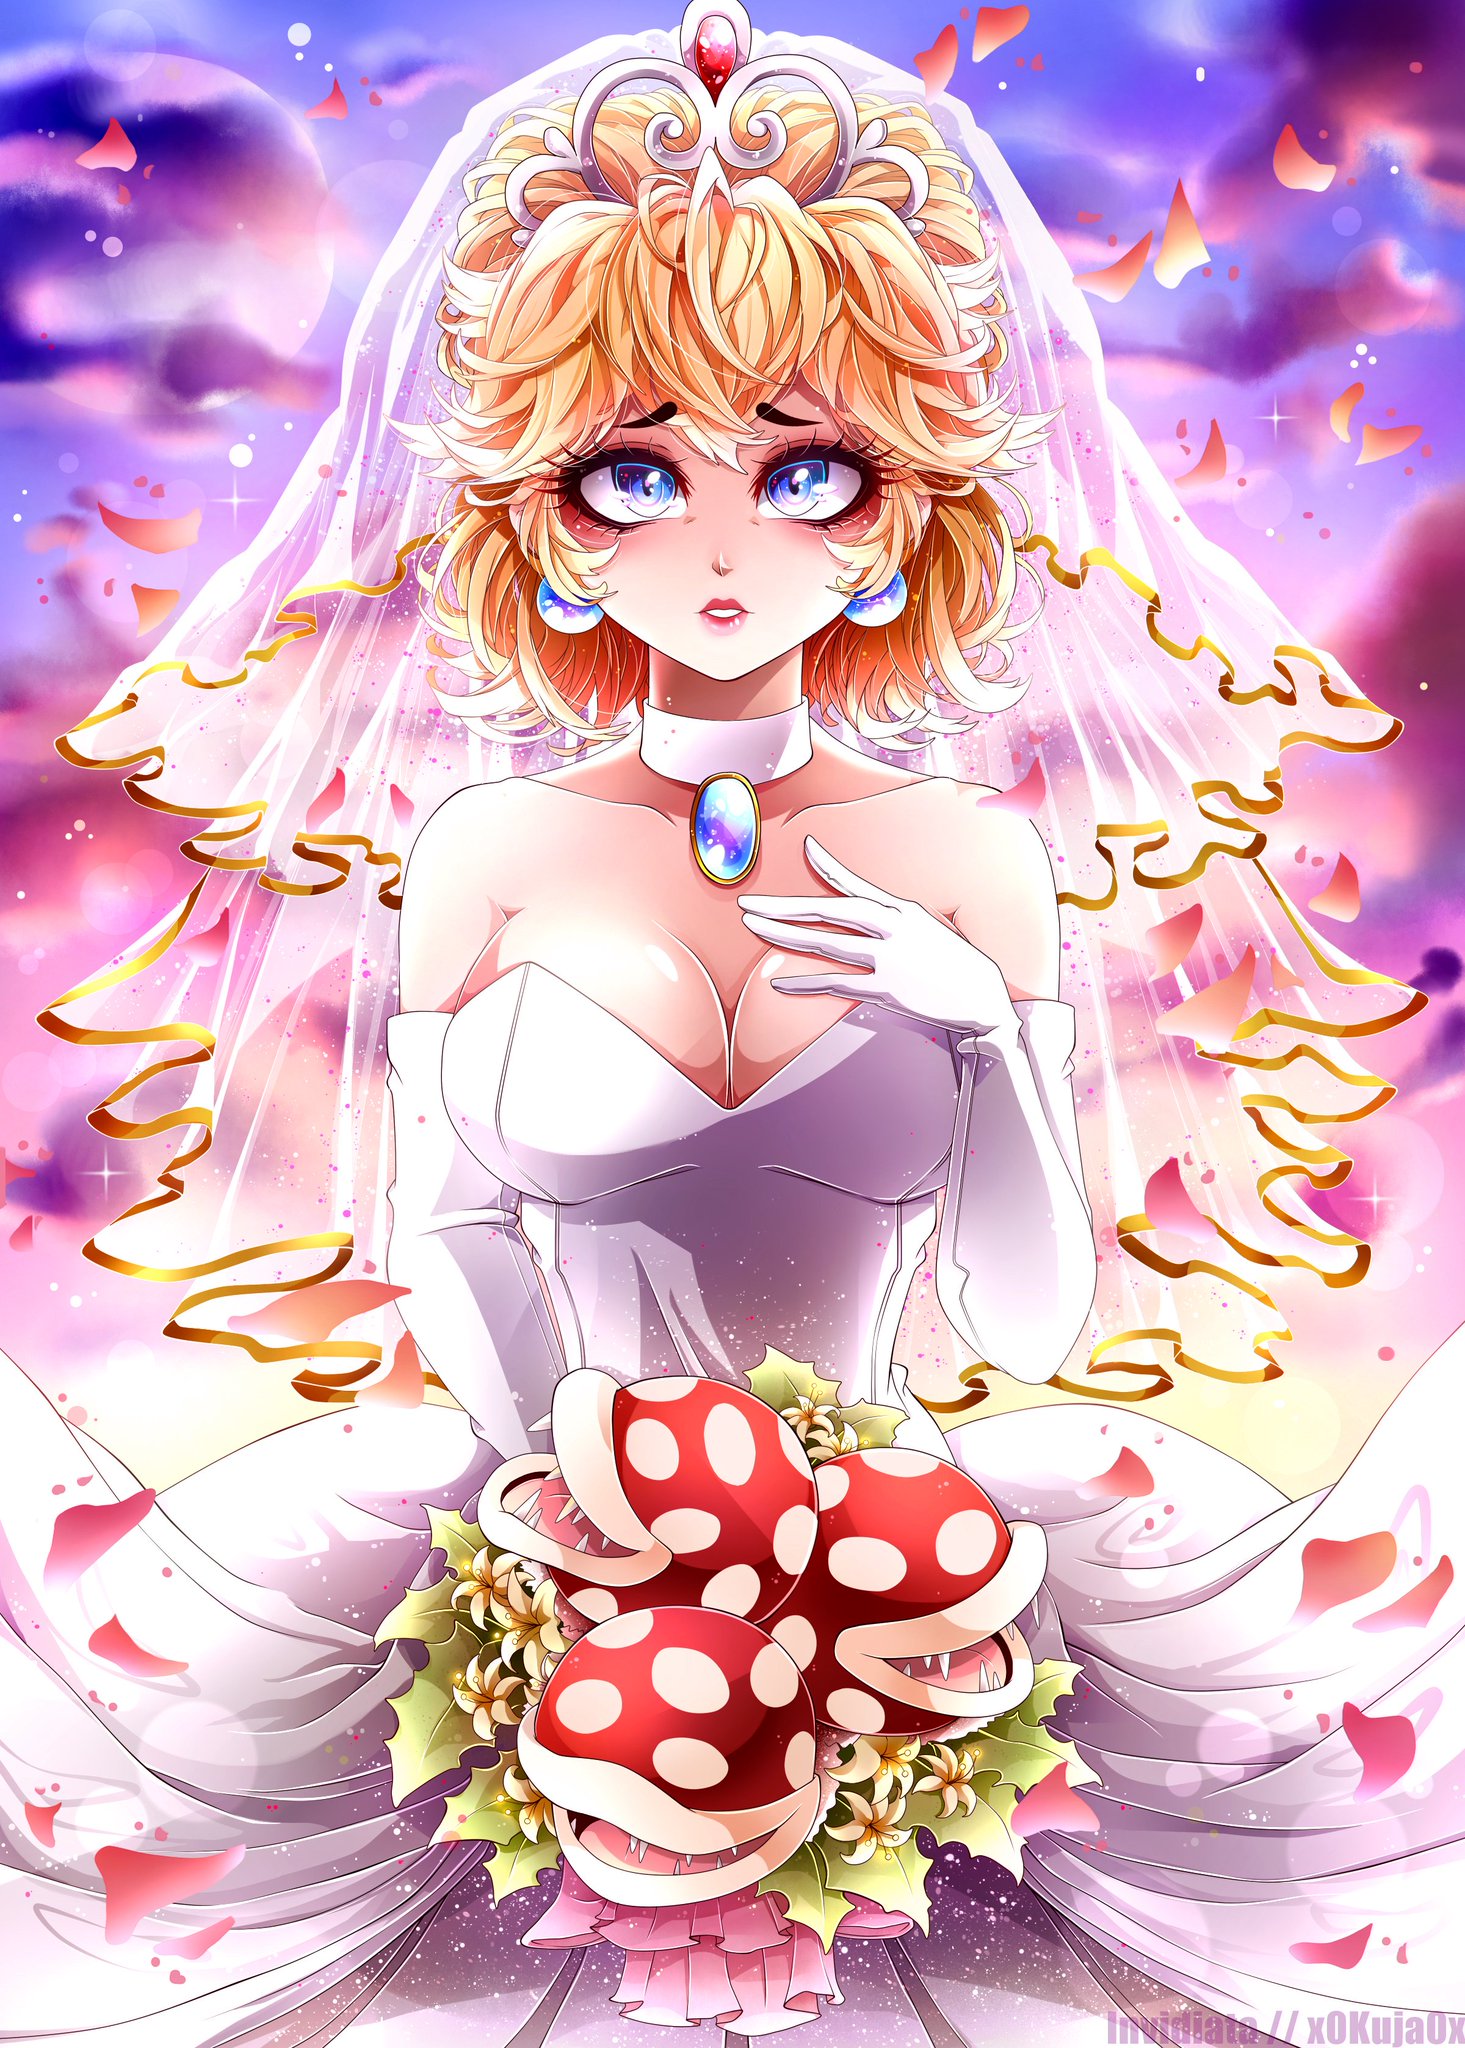 “I made a #fanart of #PrincessPeach in her wedding dress
from #Supe...